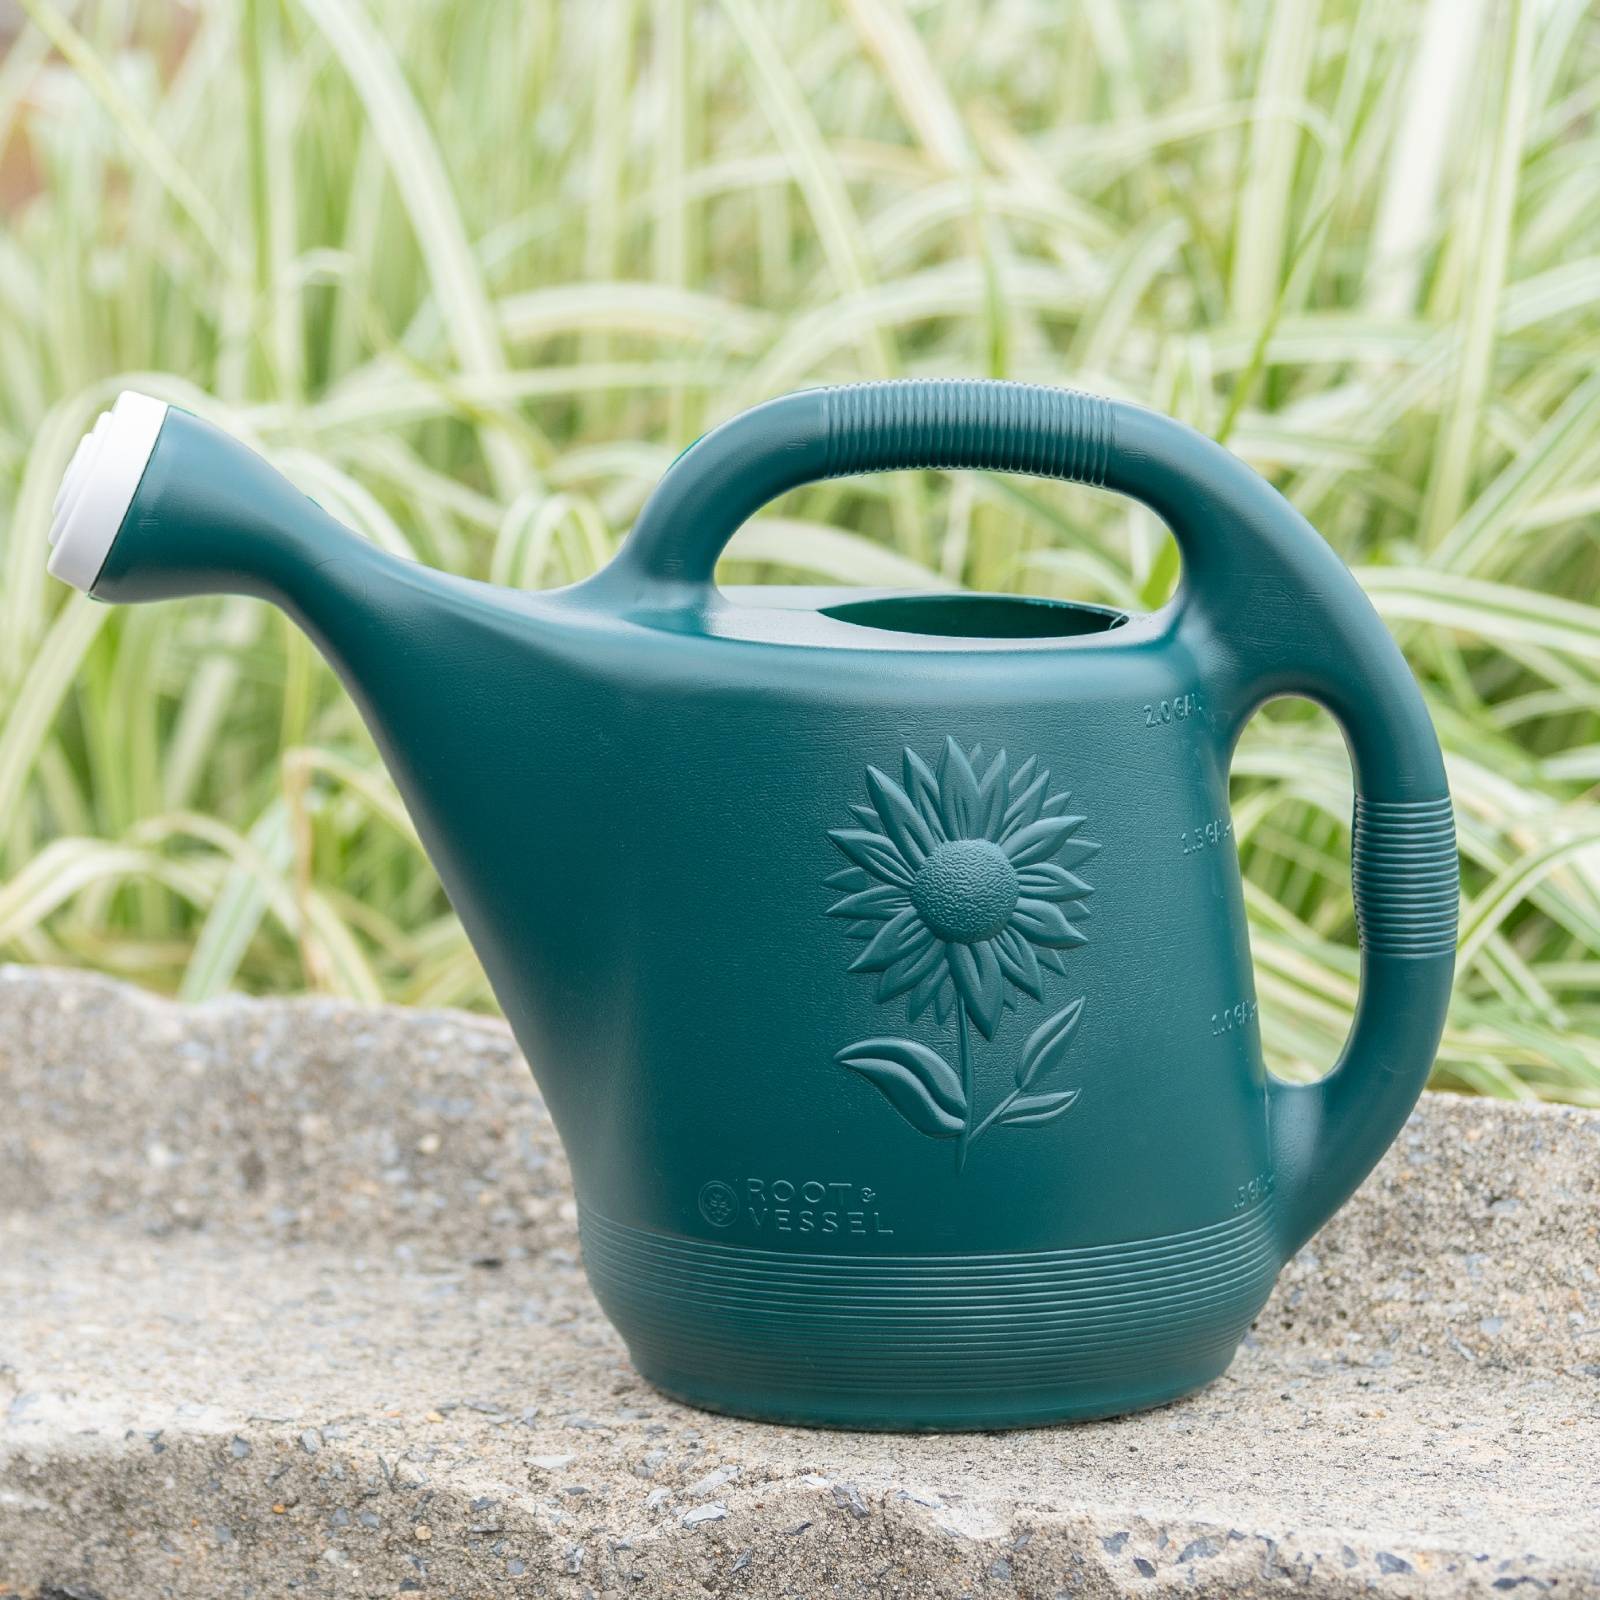 Green 2 gallon watering can